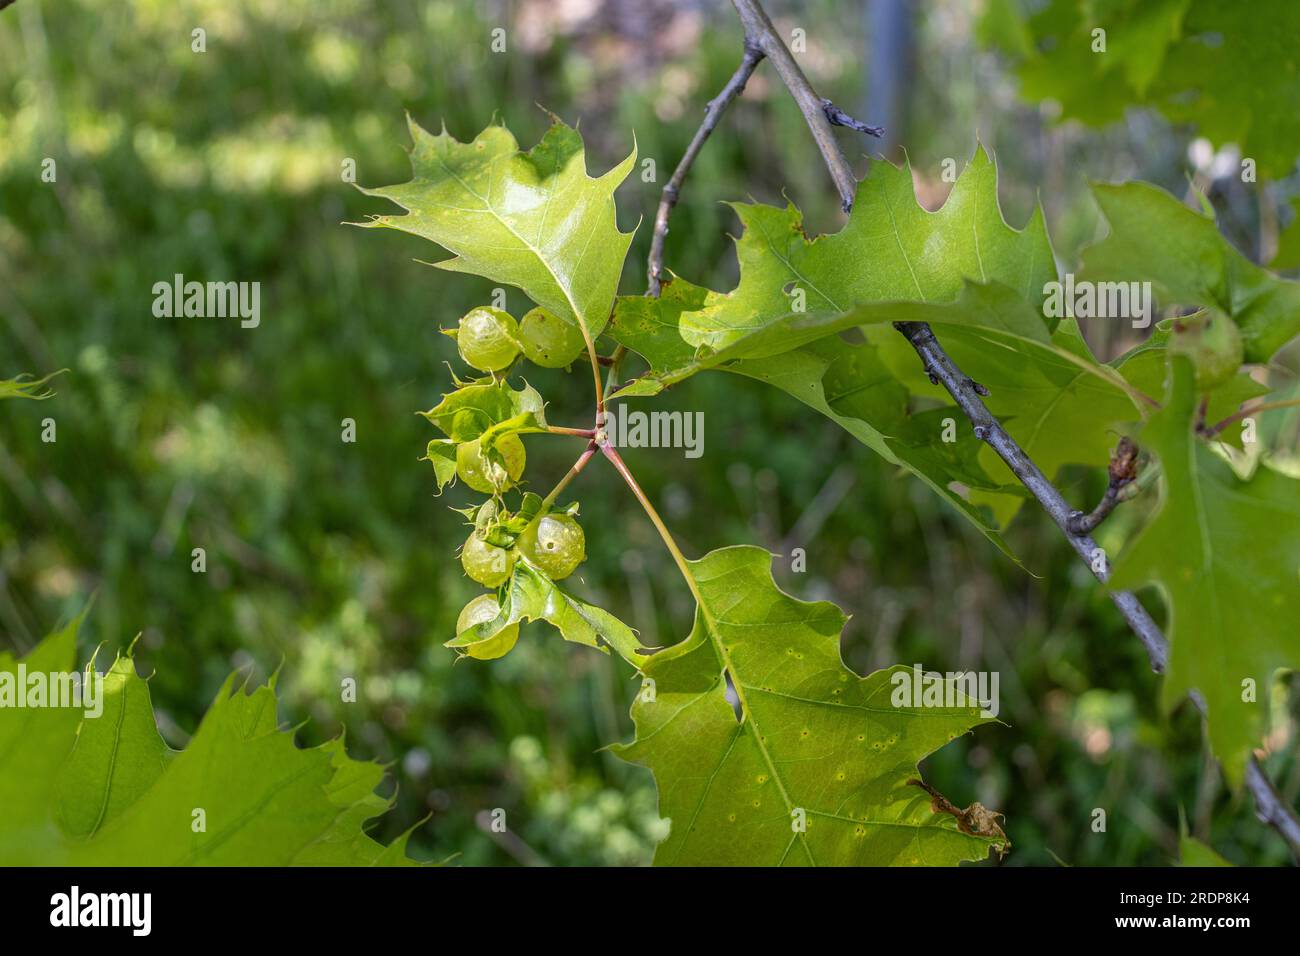 Green-leaved branch with clusters of green berries - serrated foliage - daylight shot - blurred background Stock Photo